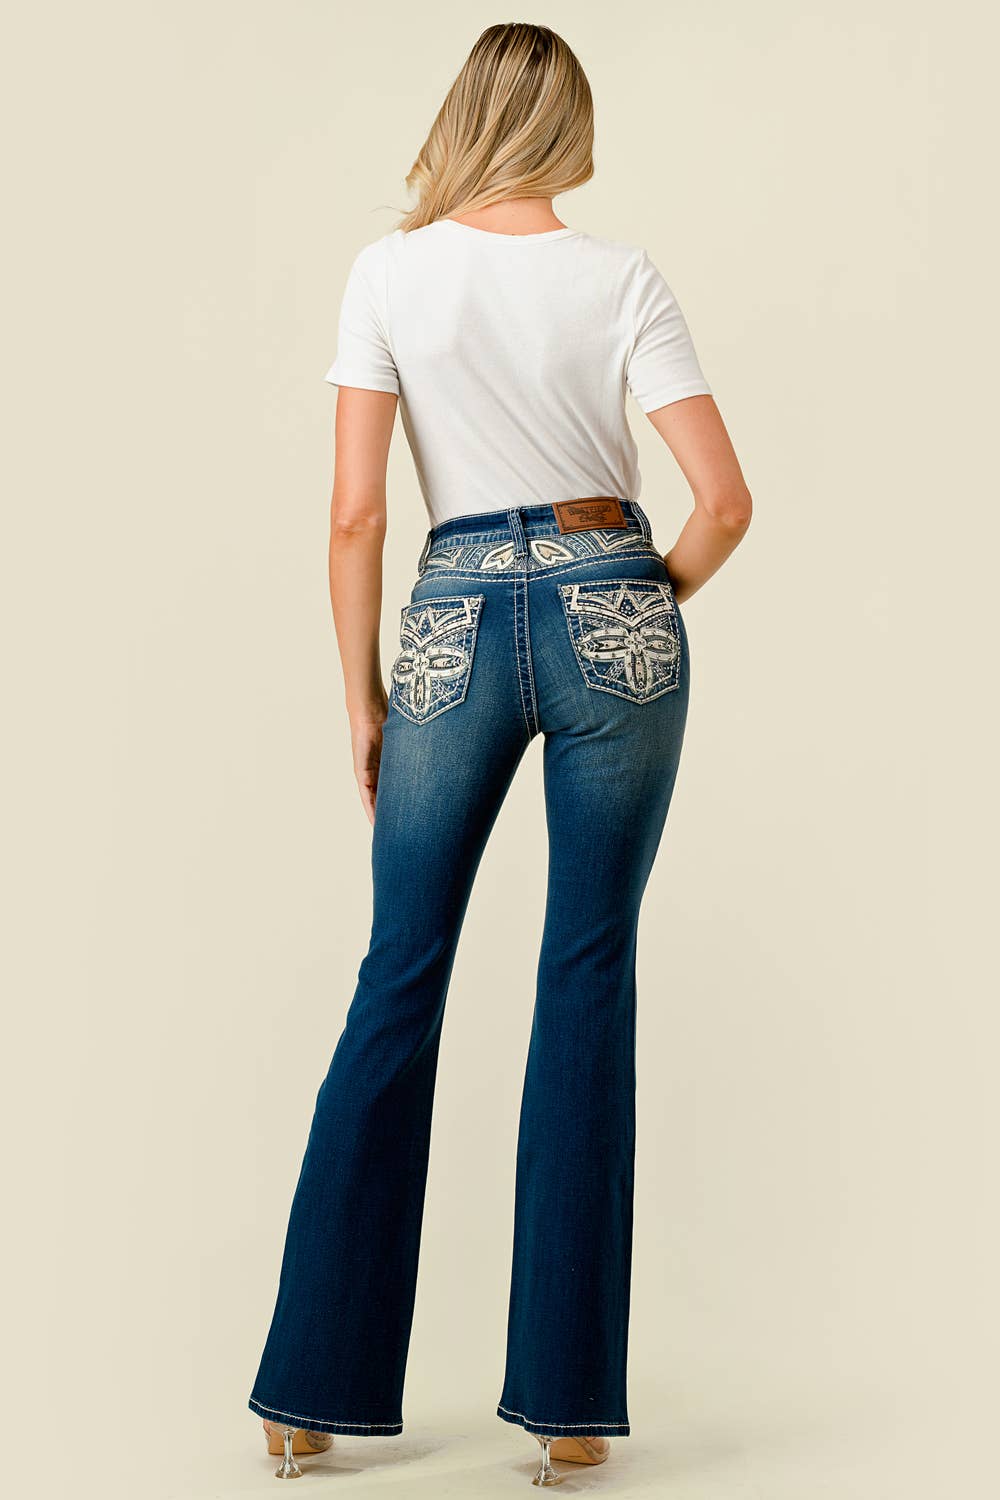 Denim Zone U.S.A. - WF-336 Flare Stretchy Women's Bling Jeans By Westfield Eagle